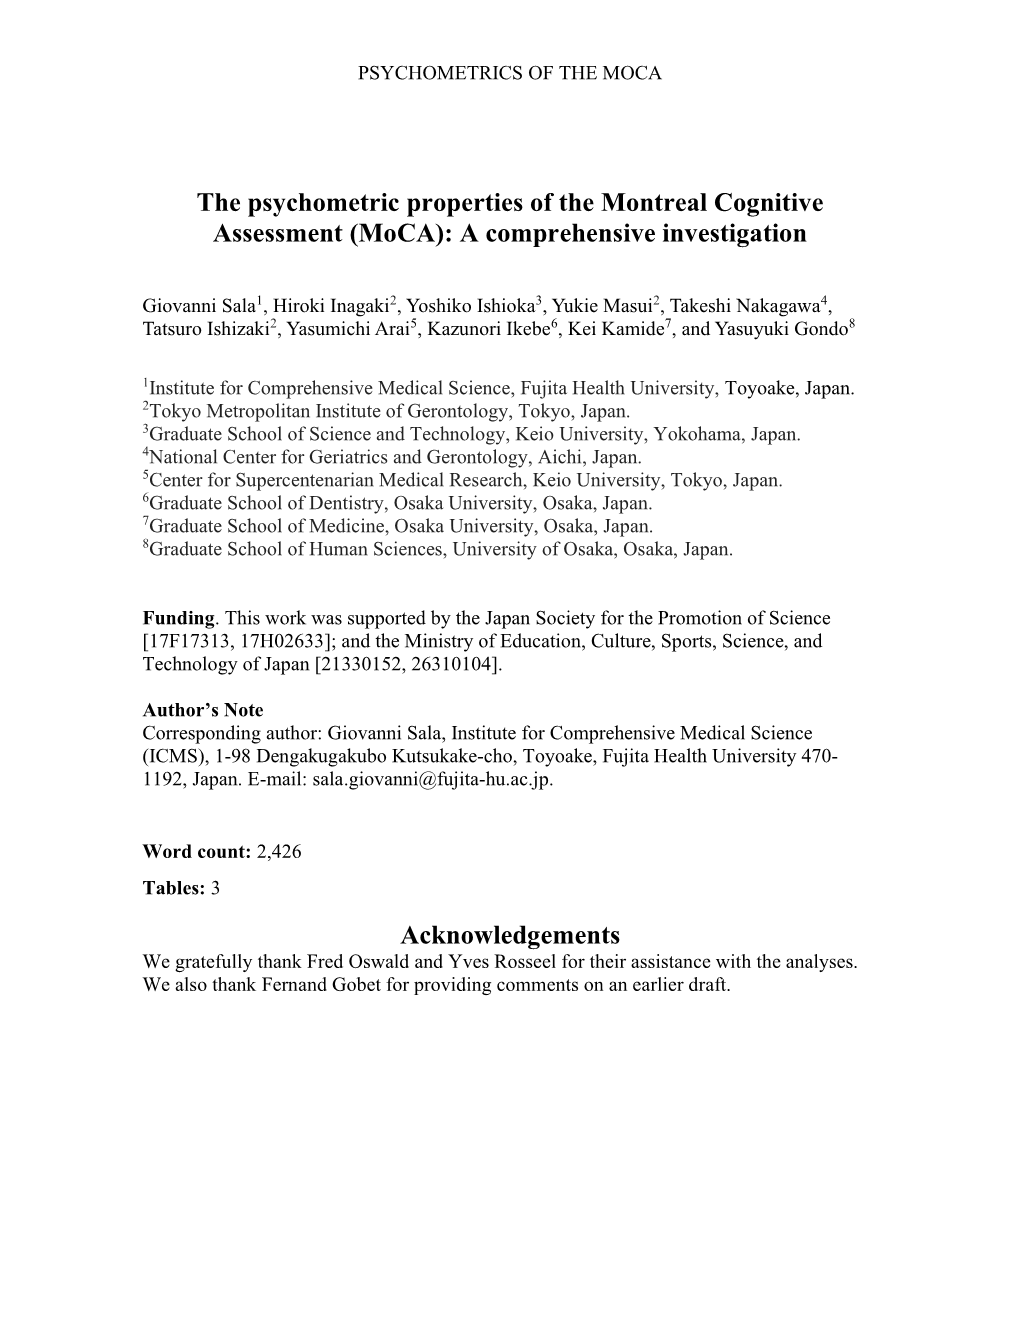 The Psychometric Properties of the Montreal Cognitive Assessment (Moca): a Comprehensive Investigation